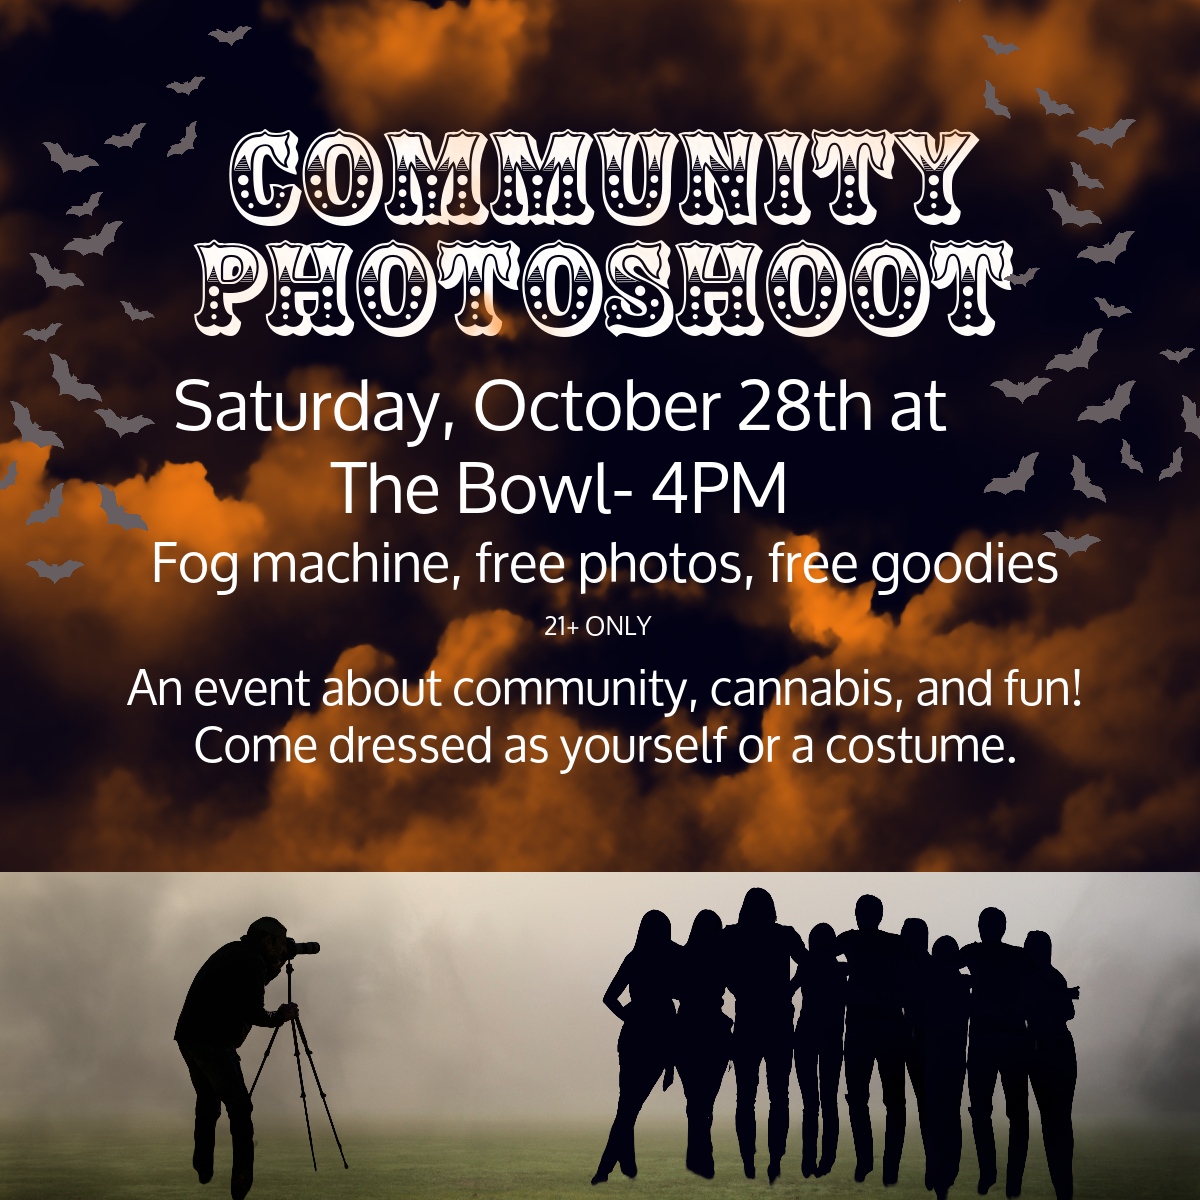 Come on out for spooky photos next weekend! #microdifference #craftcultivation #resistcorporateweed #onlydowntowndispo #muskegonmicro #muskegonmade #muskegonproud #ditchthedispensary #smokelocal #wecannacare #cannabistourism #thisismuskegon #visitmuskegon